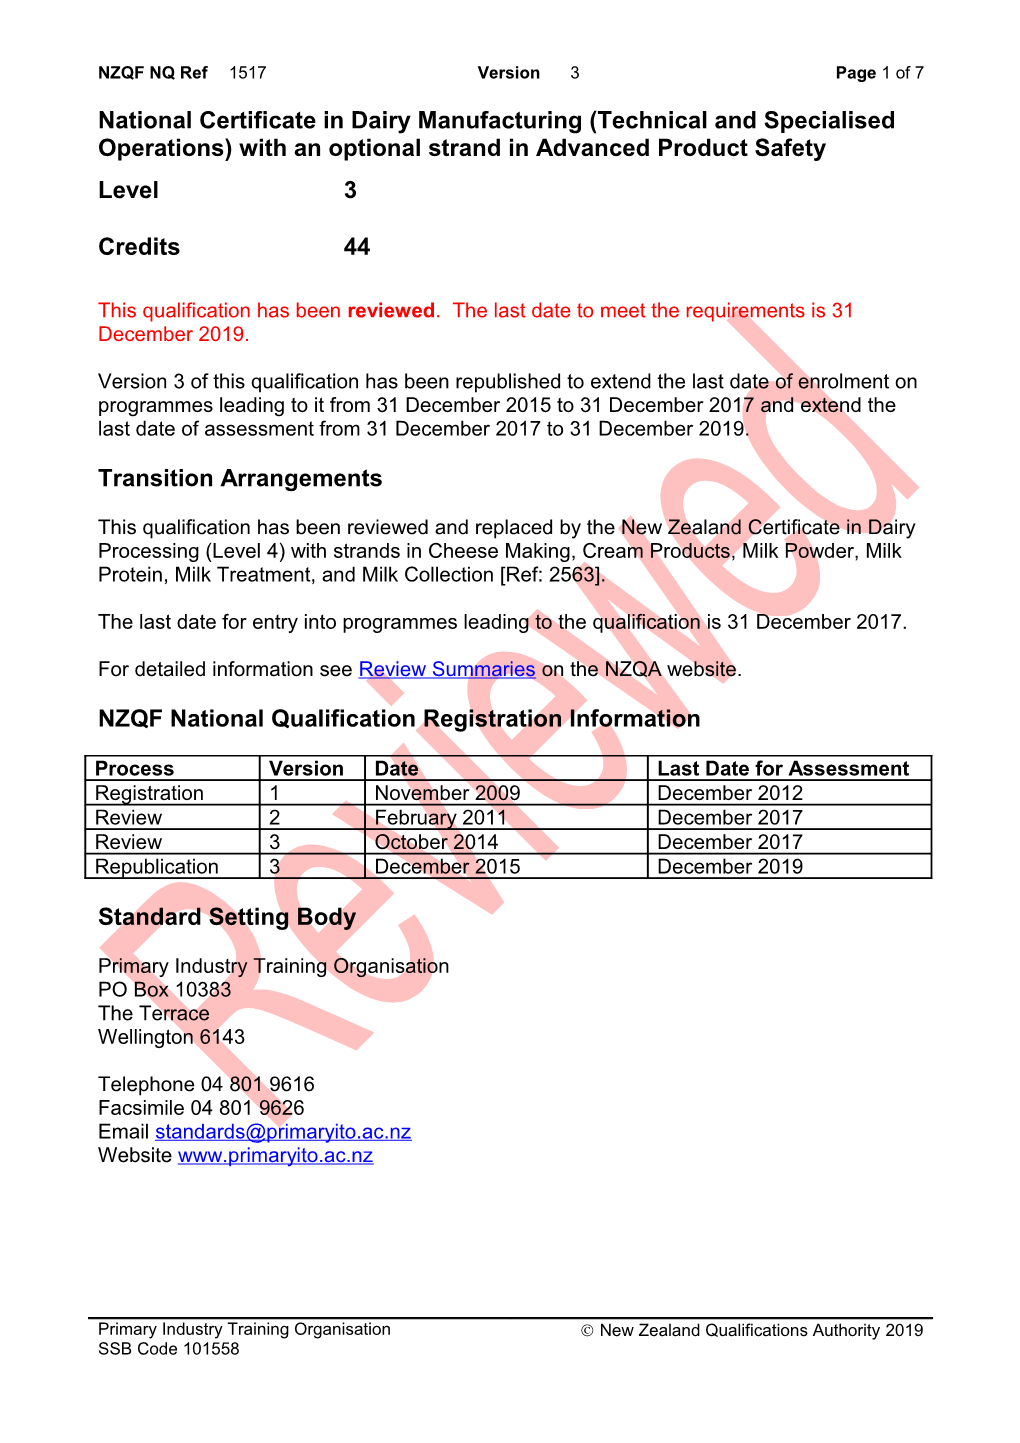 1517 National Certificate in Dairy Manufacturing (Technical and Specialised Operations)